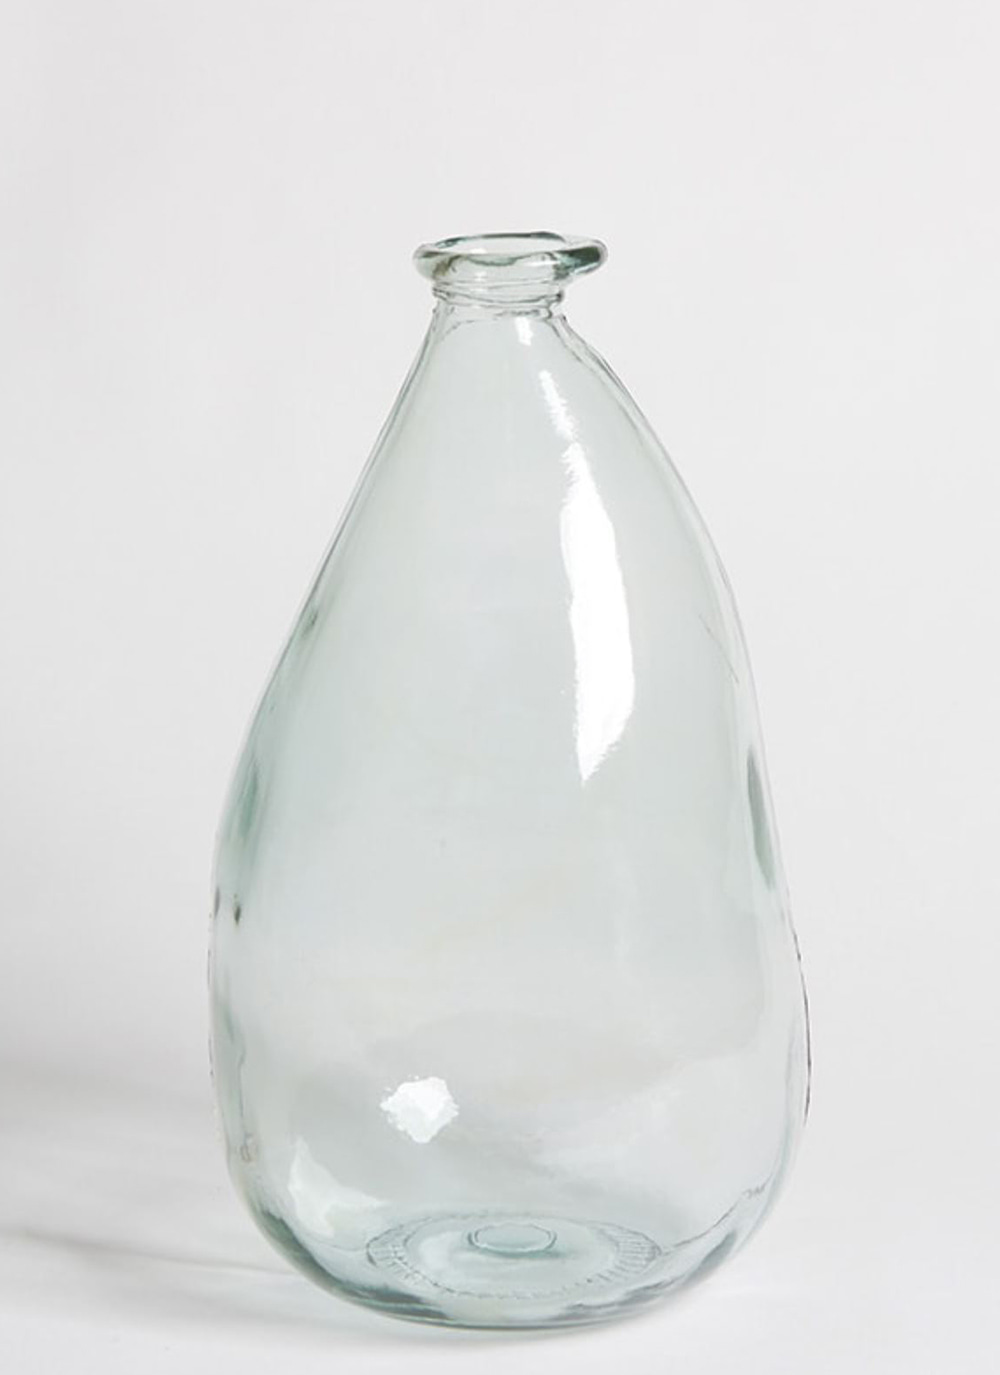 100 % recycled glass bottle